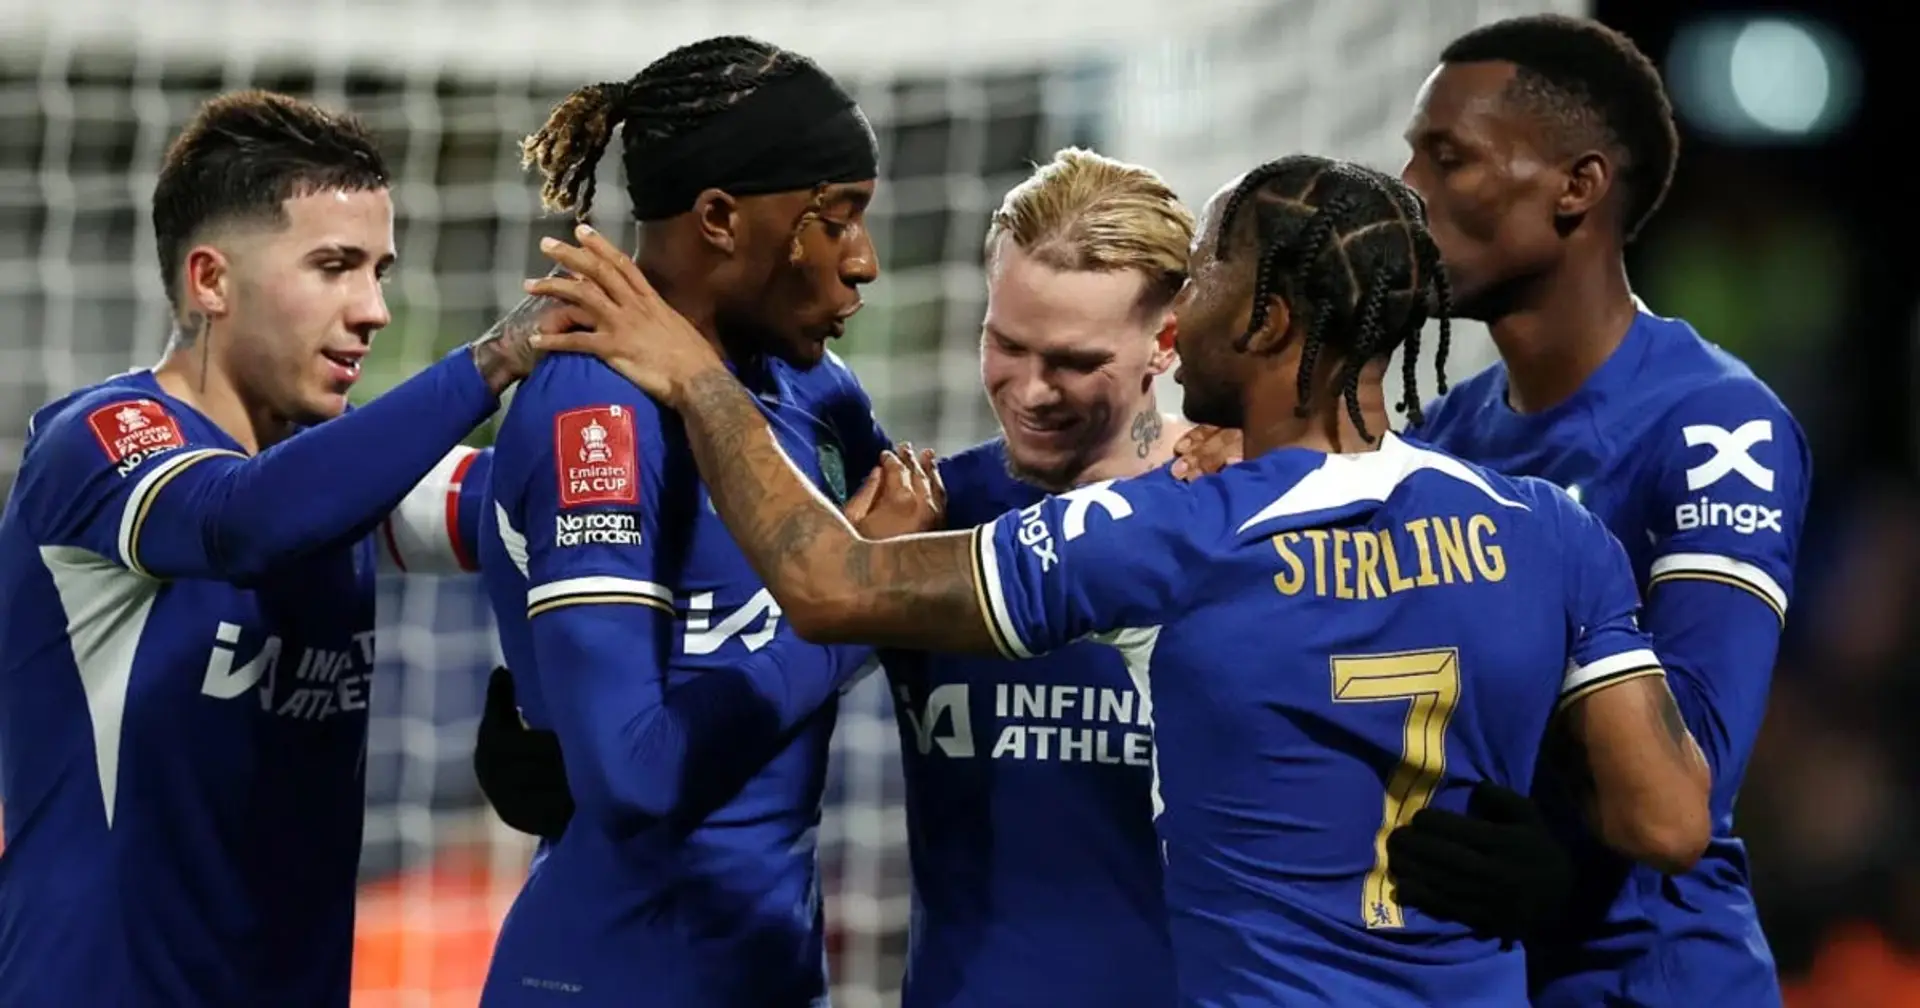 Chelsea move onto FA Cup quarter-finals & 3 more big stories you might've missed